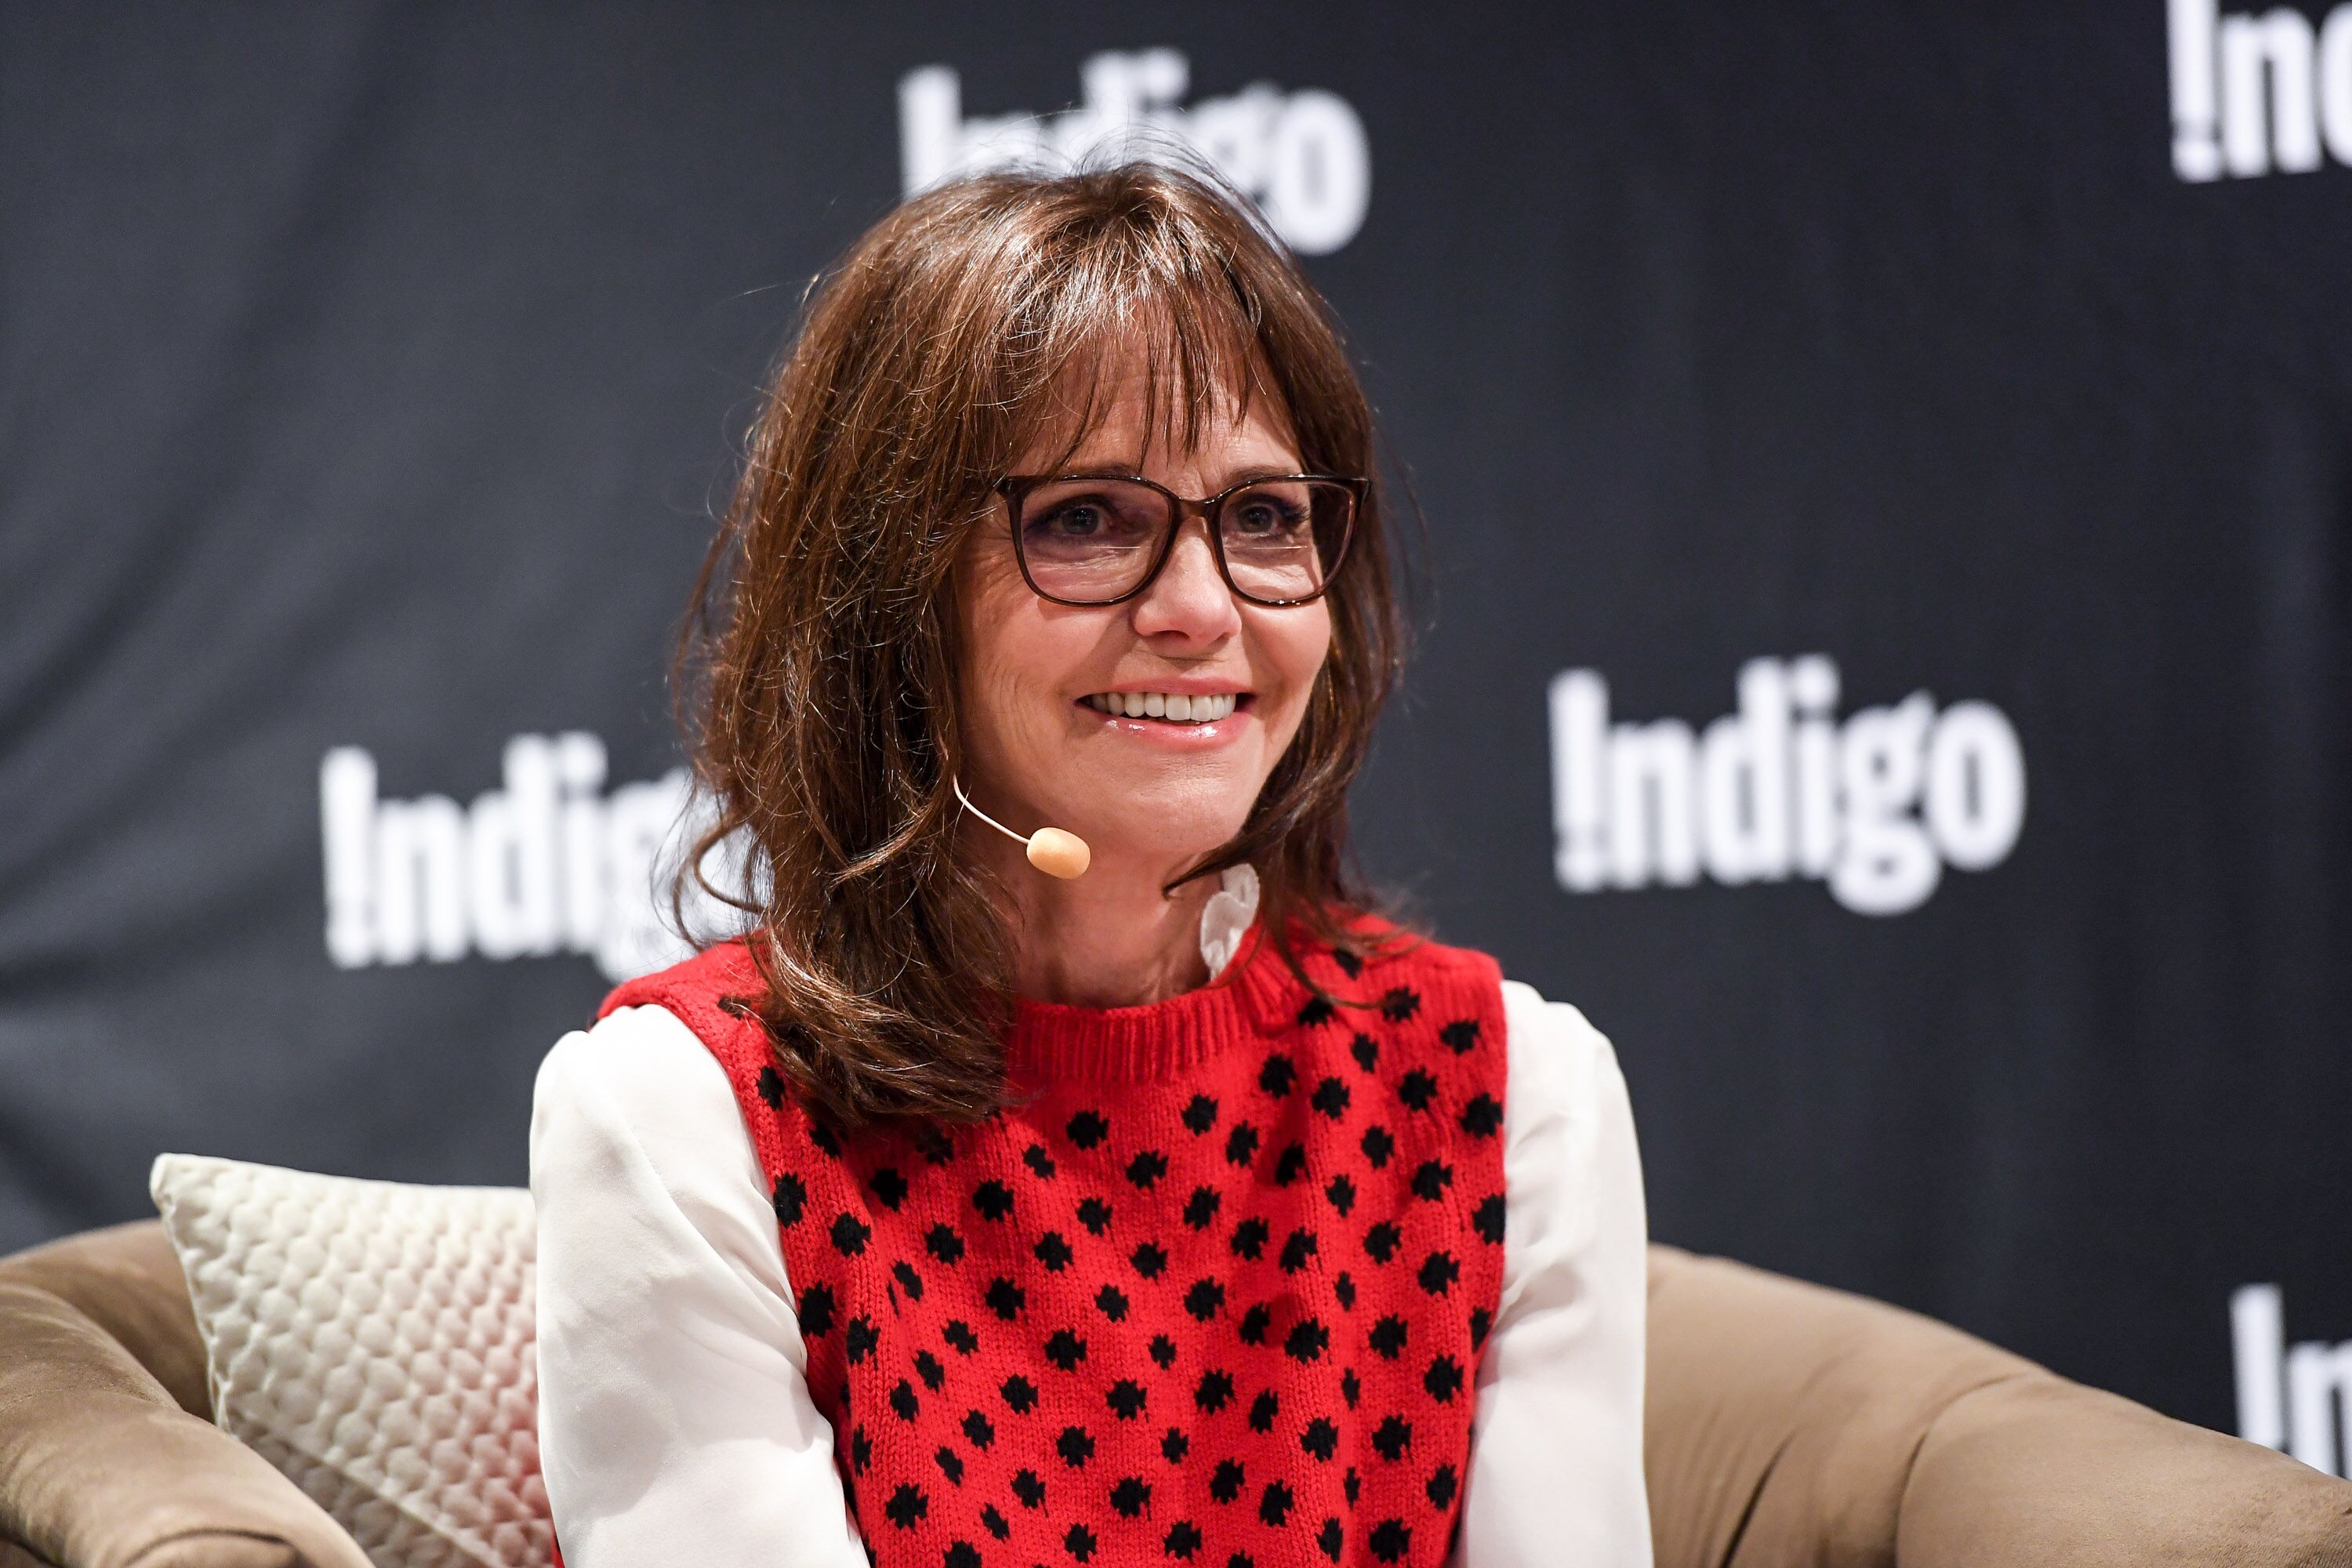 Sally Field signs copies of her new book "In Pieces" at Indigo Bay & Bloor on October 9, 2018 in Toronto, Canada | Photo: Getty Images